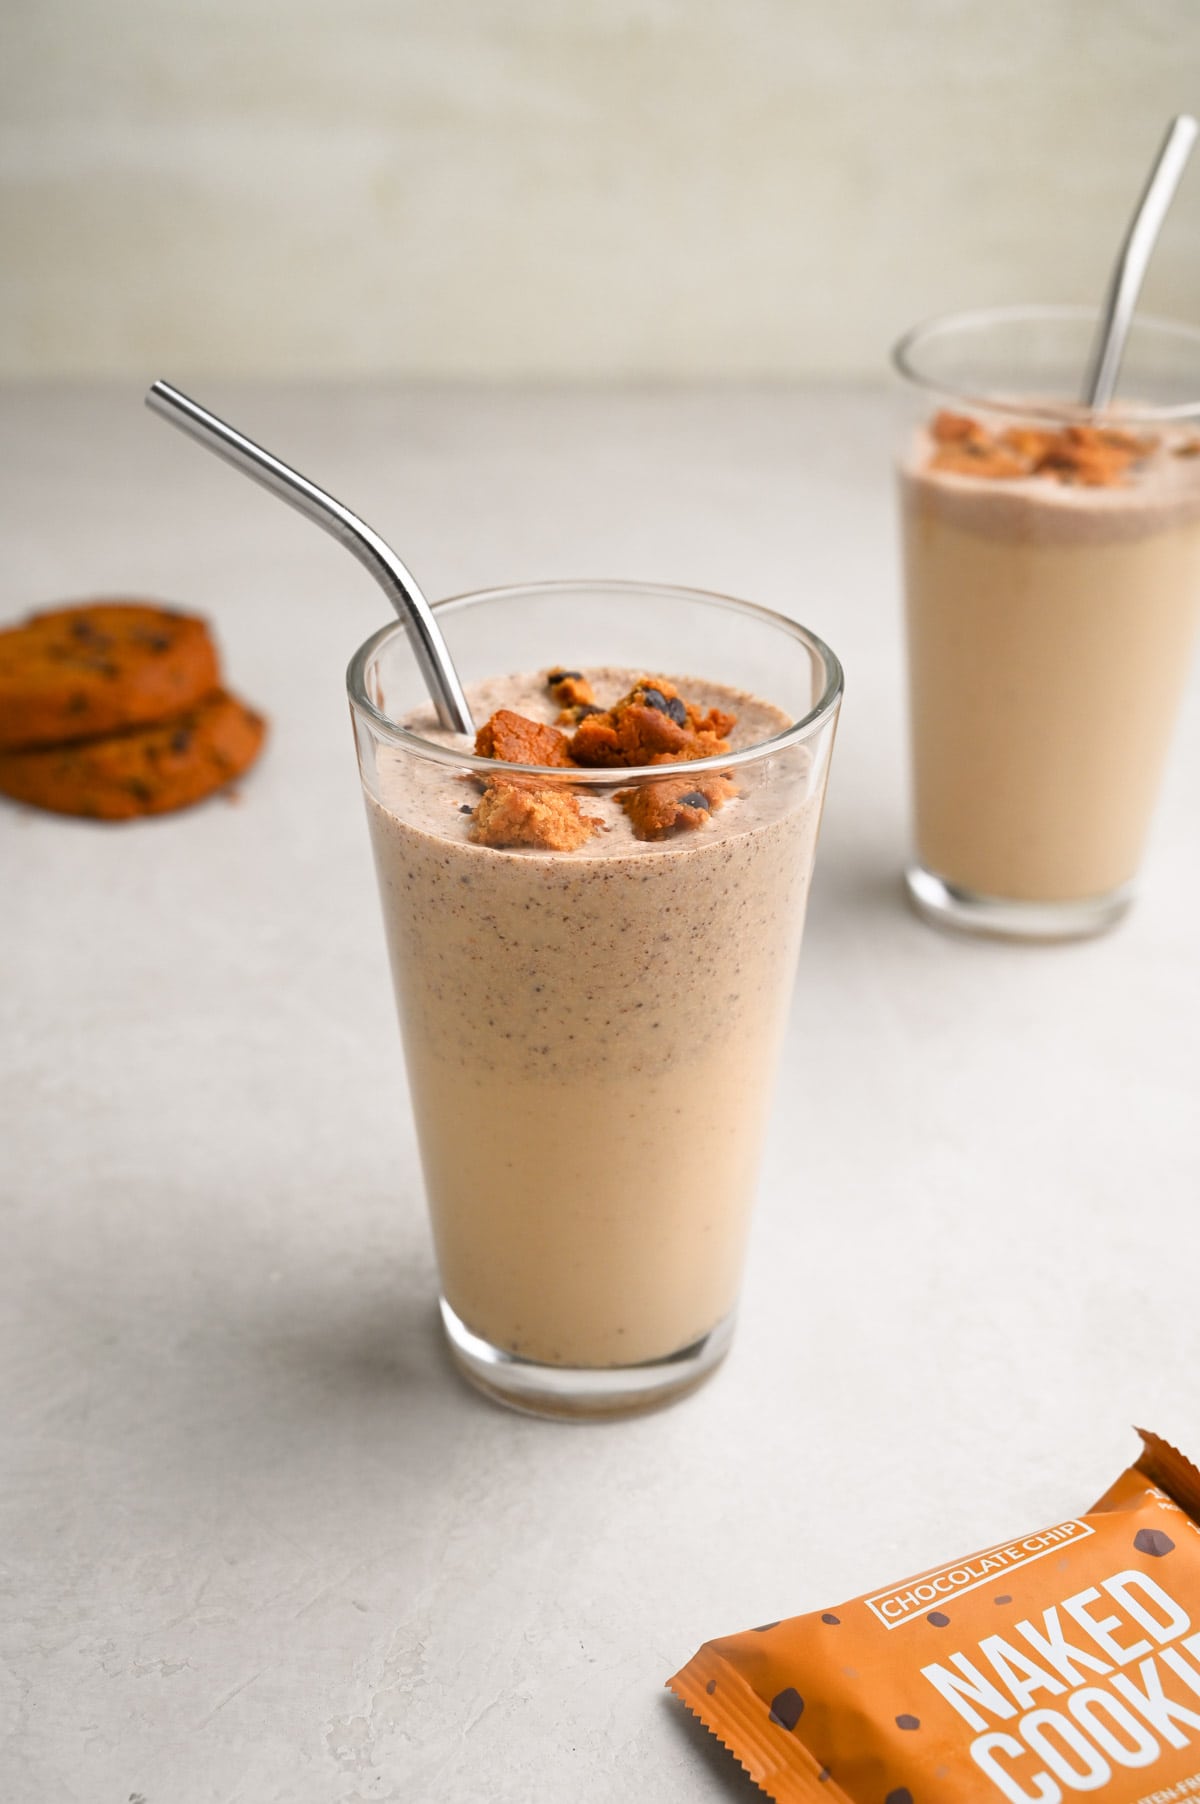 Angled view of two glasses of cookie shakes with protein chocolate chip cookies crumbled on top and whole cookies in the background.